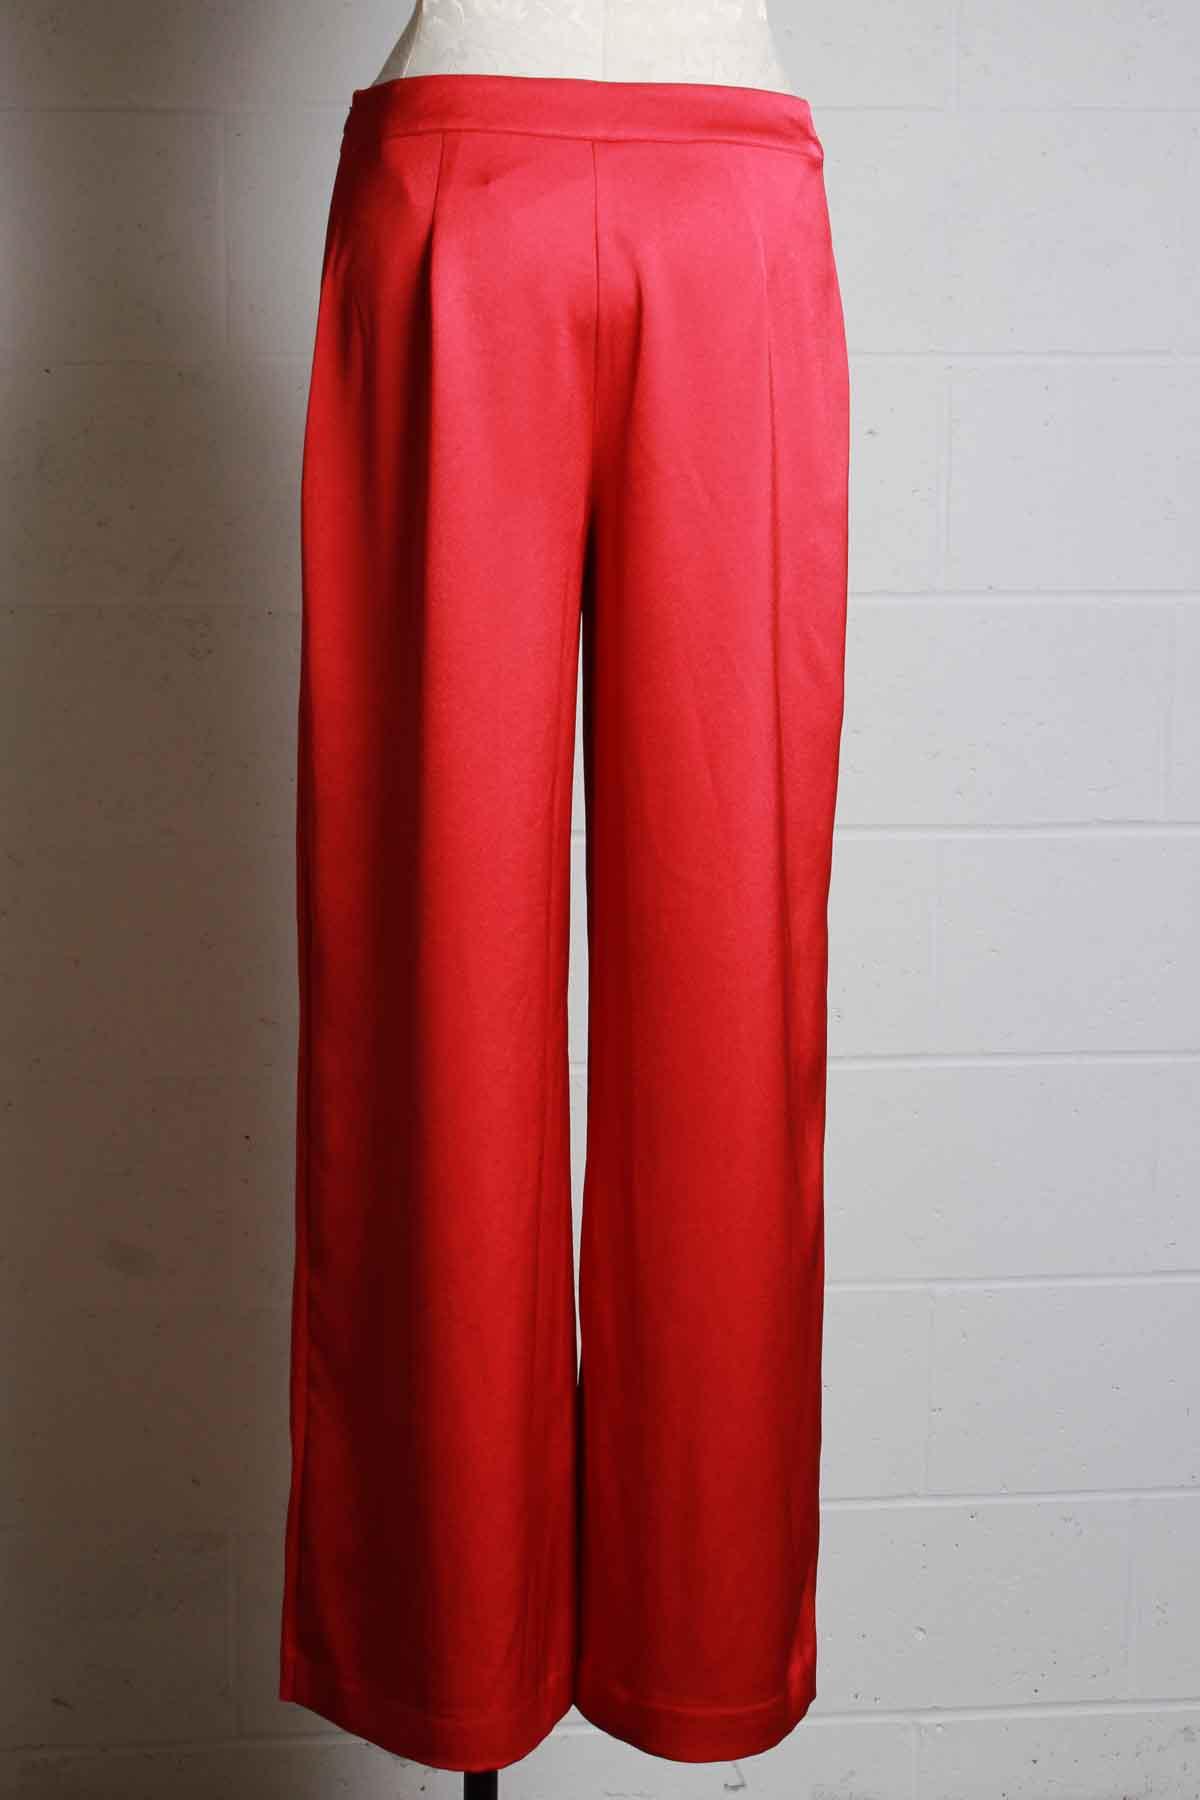 back view of ribbon red wide leg satin pant by Trina Turk with banded waist and concealed side zip